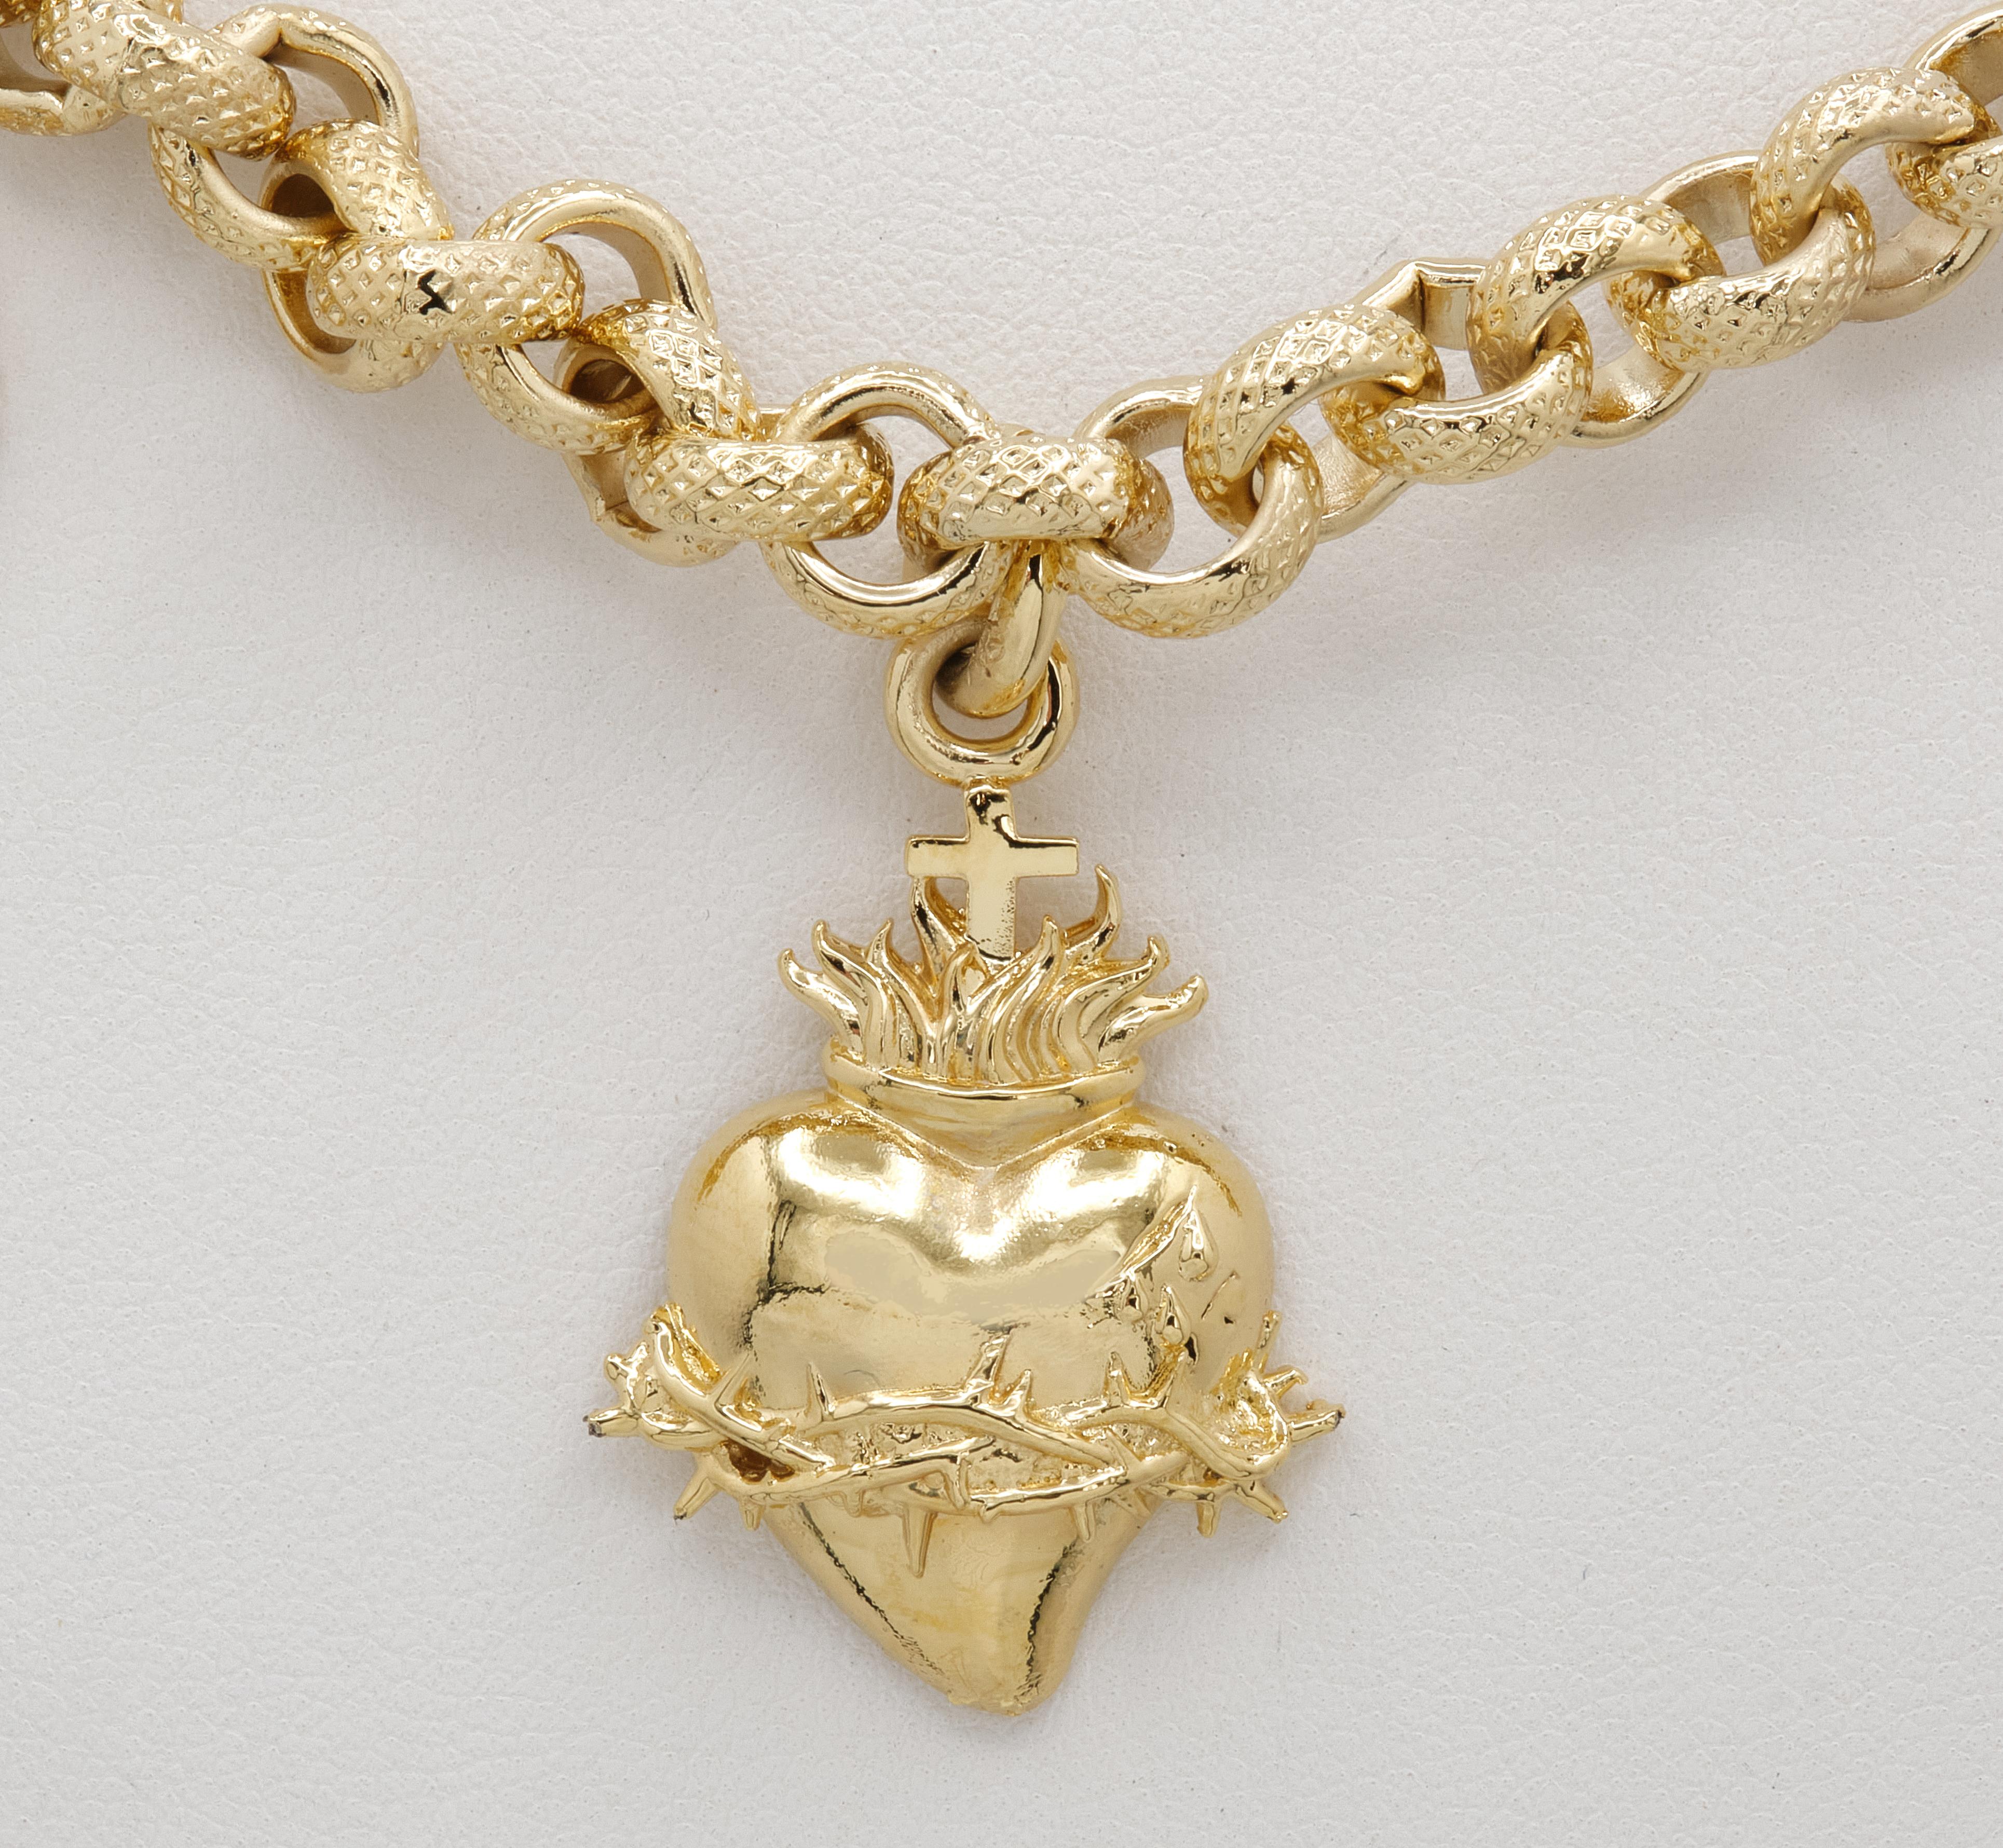 Renaissance Revival Silver Necklace with Sacred Hearts of Jesus, Joseph and Mary